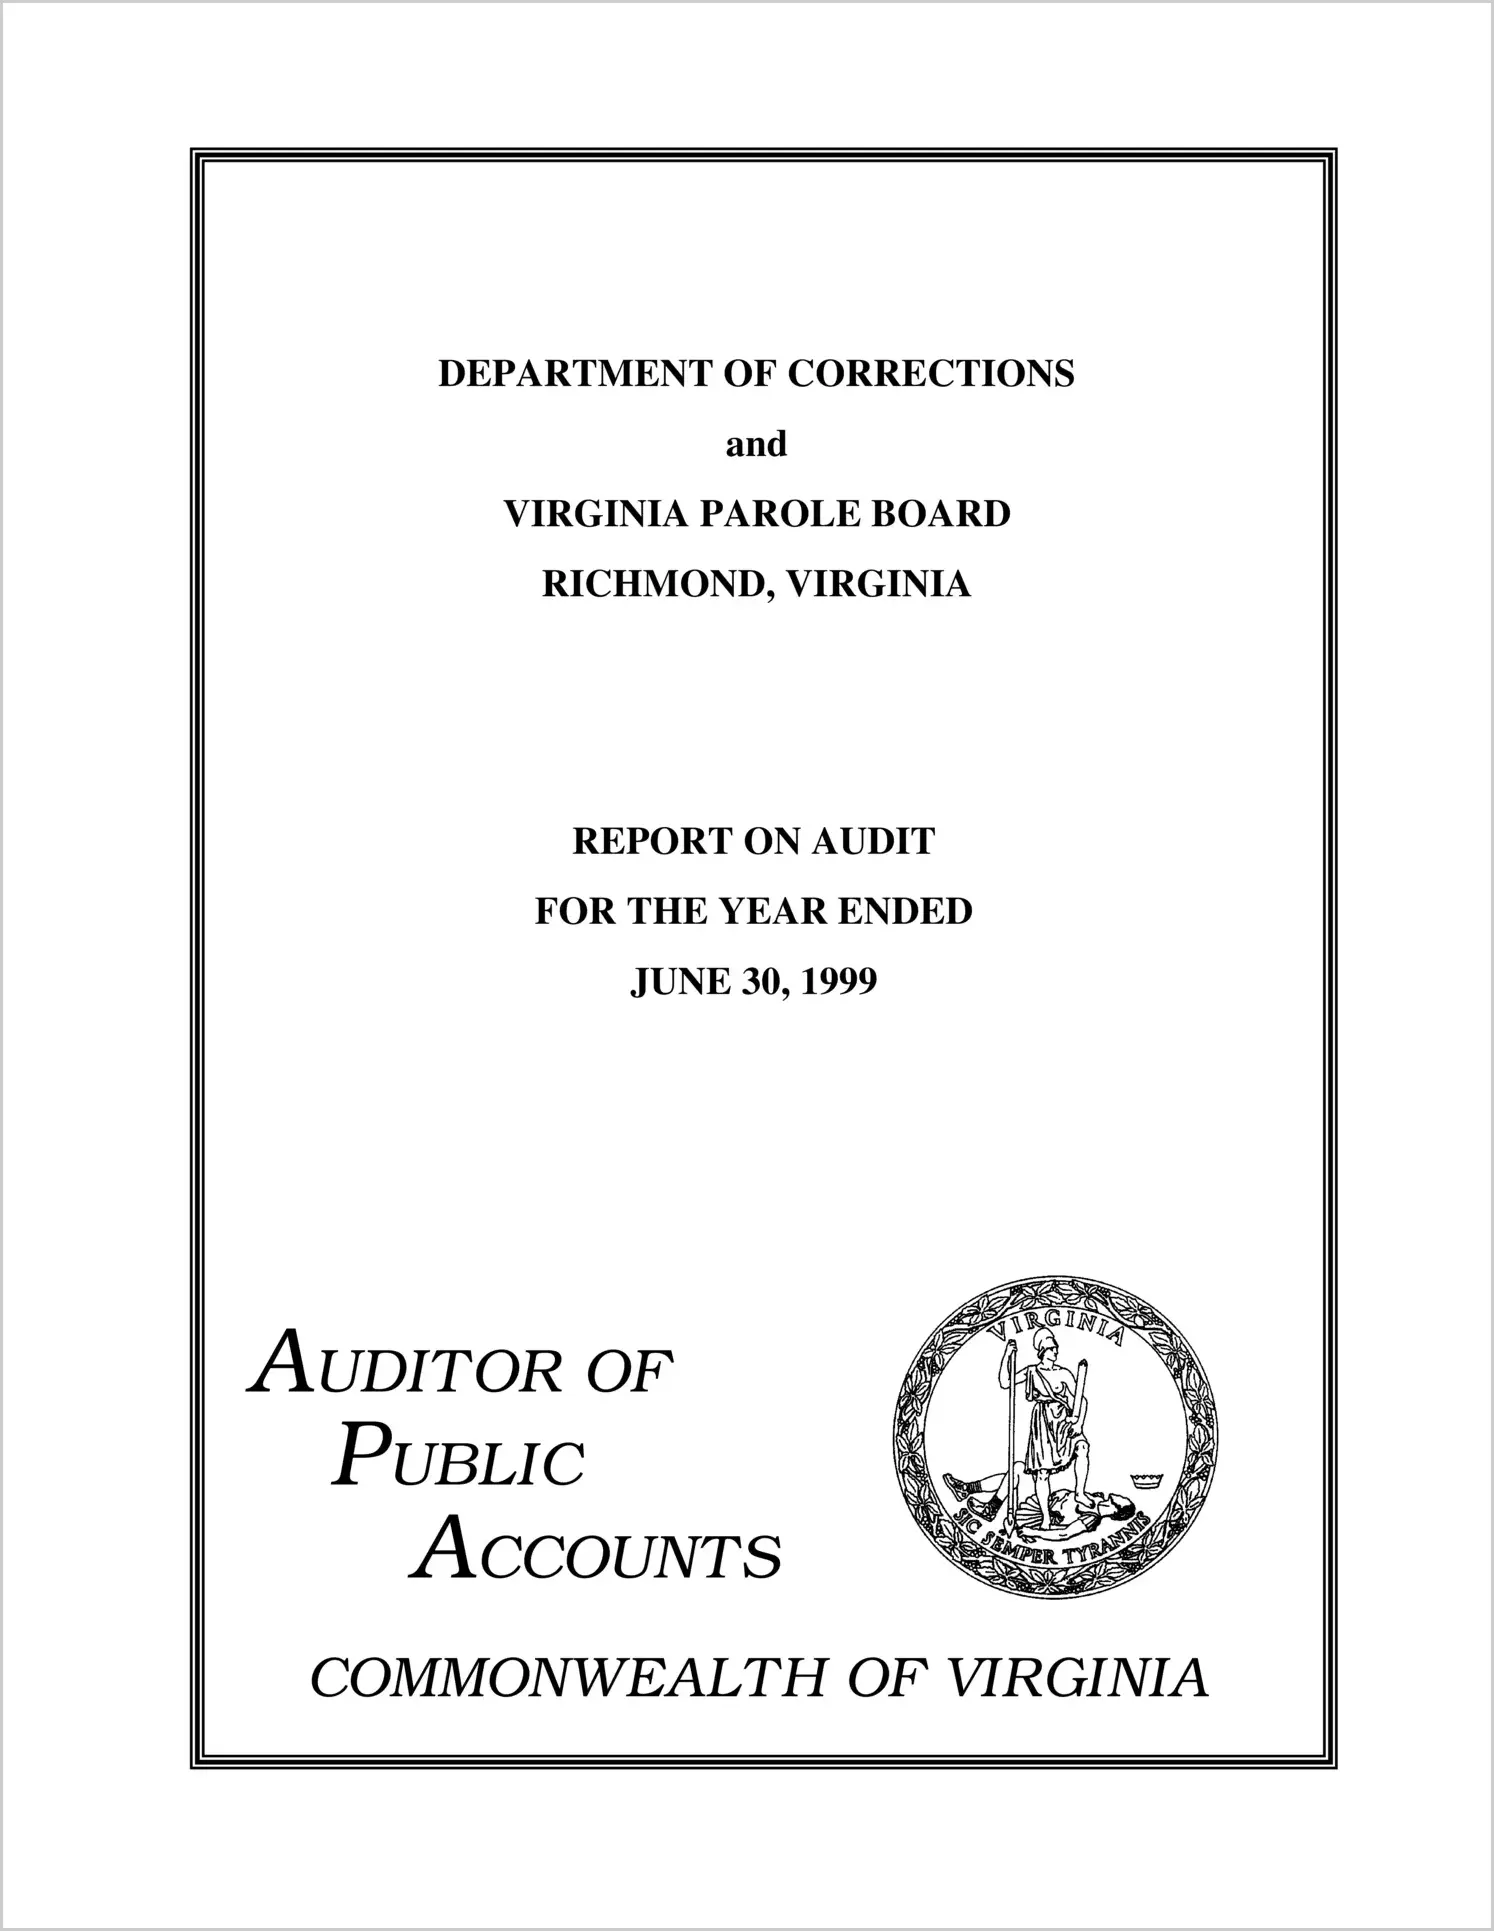 Department of Corrections and Virginia Parole Board for the year ended June 30, 1999